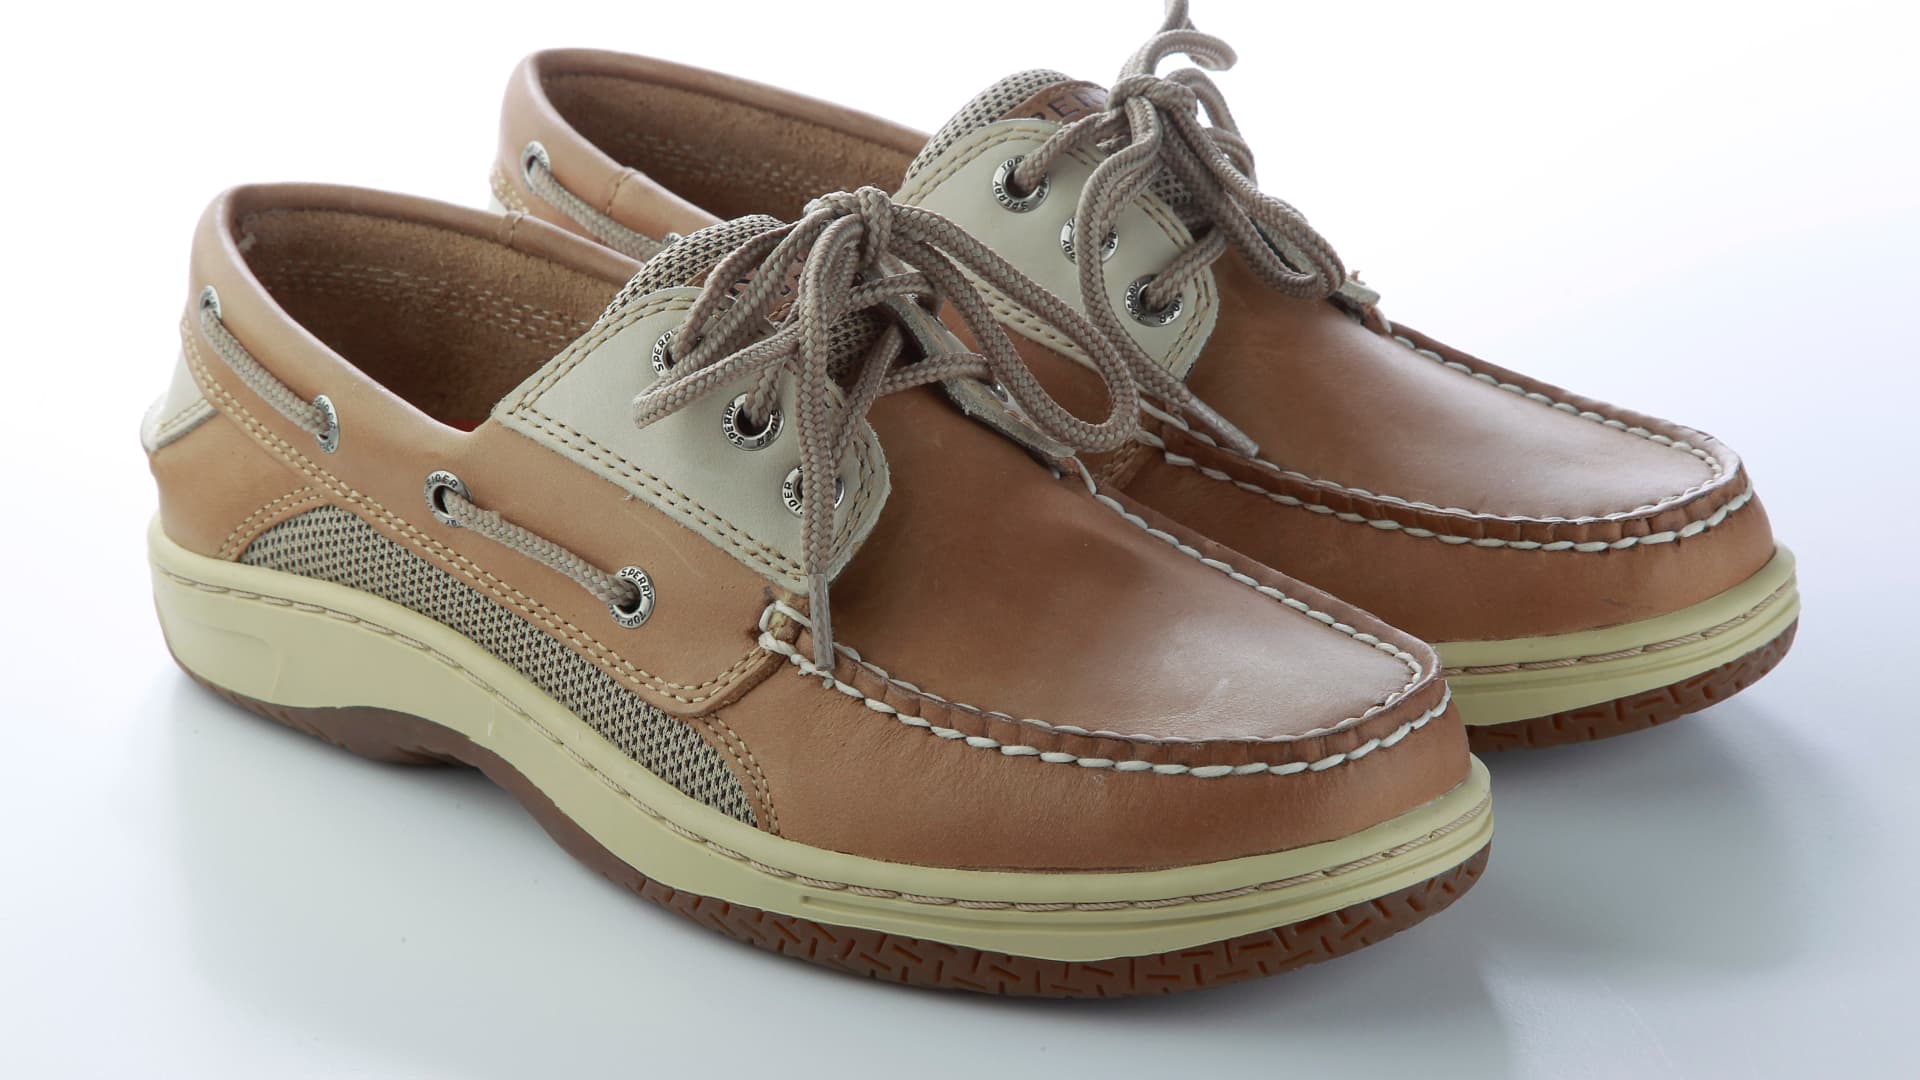 Wolverine World Wide sells Sperry to Authentic Brands Group